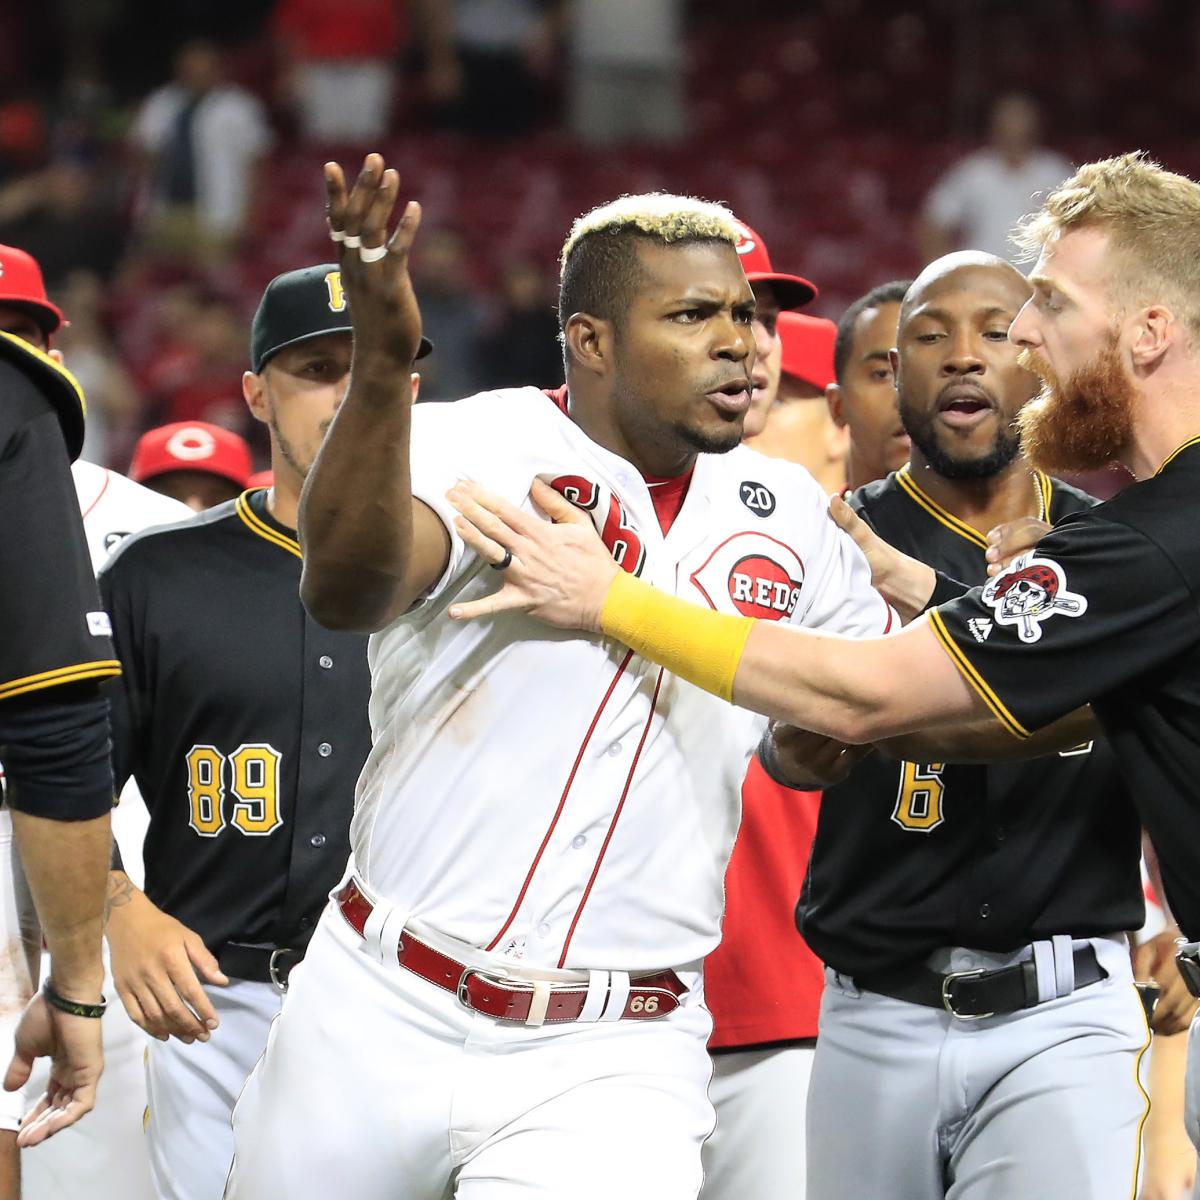 Chris Archer, Yasiel Puig suspended for Reds/Pirates brawl - Lone